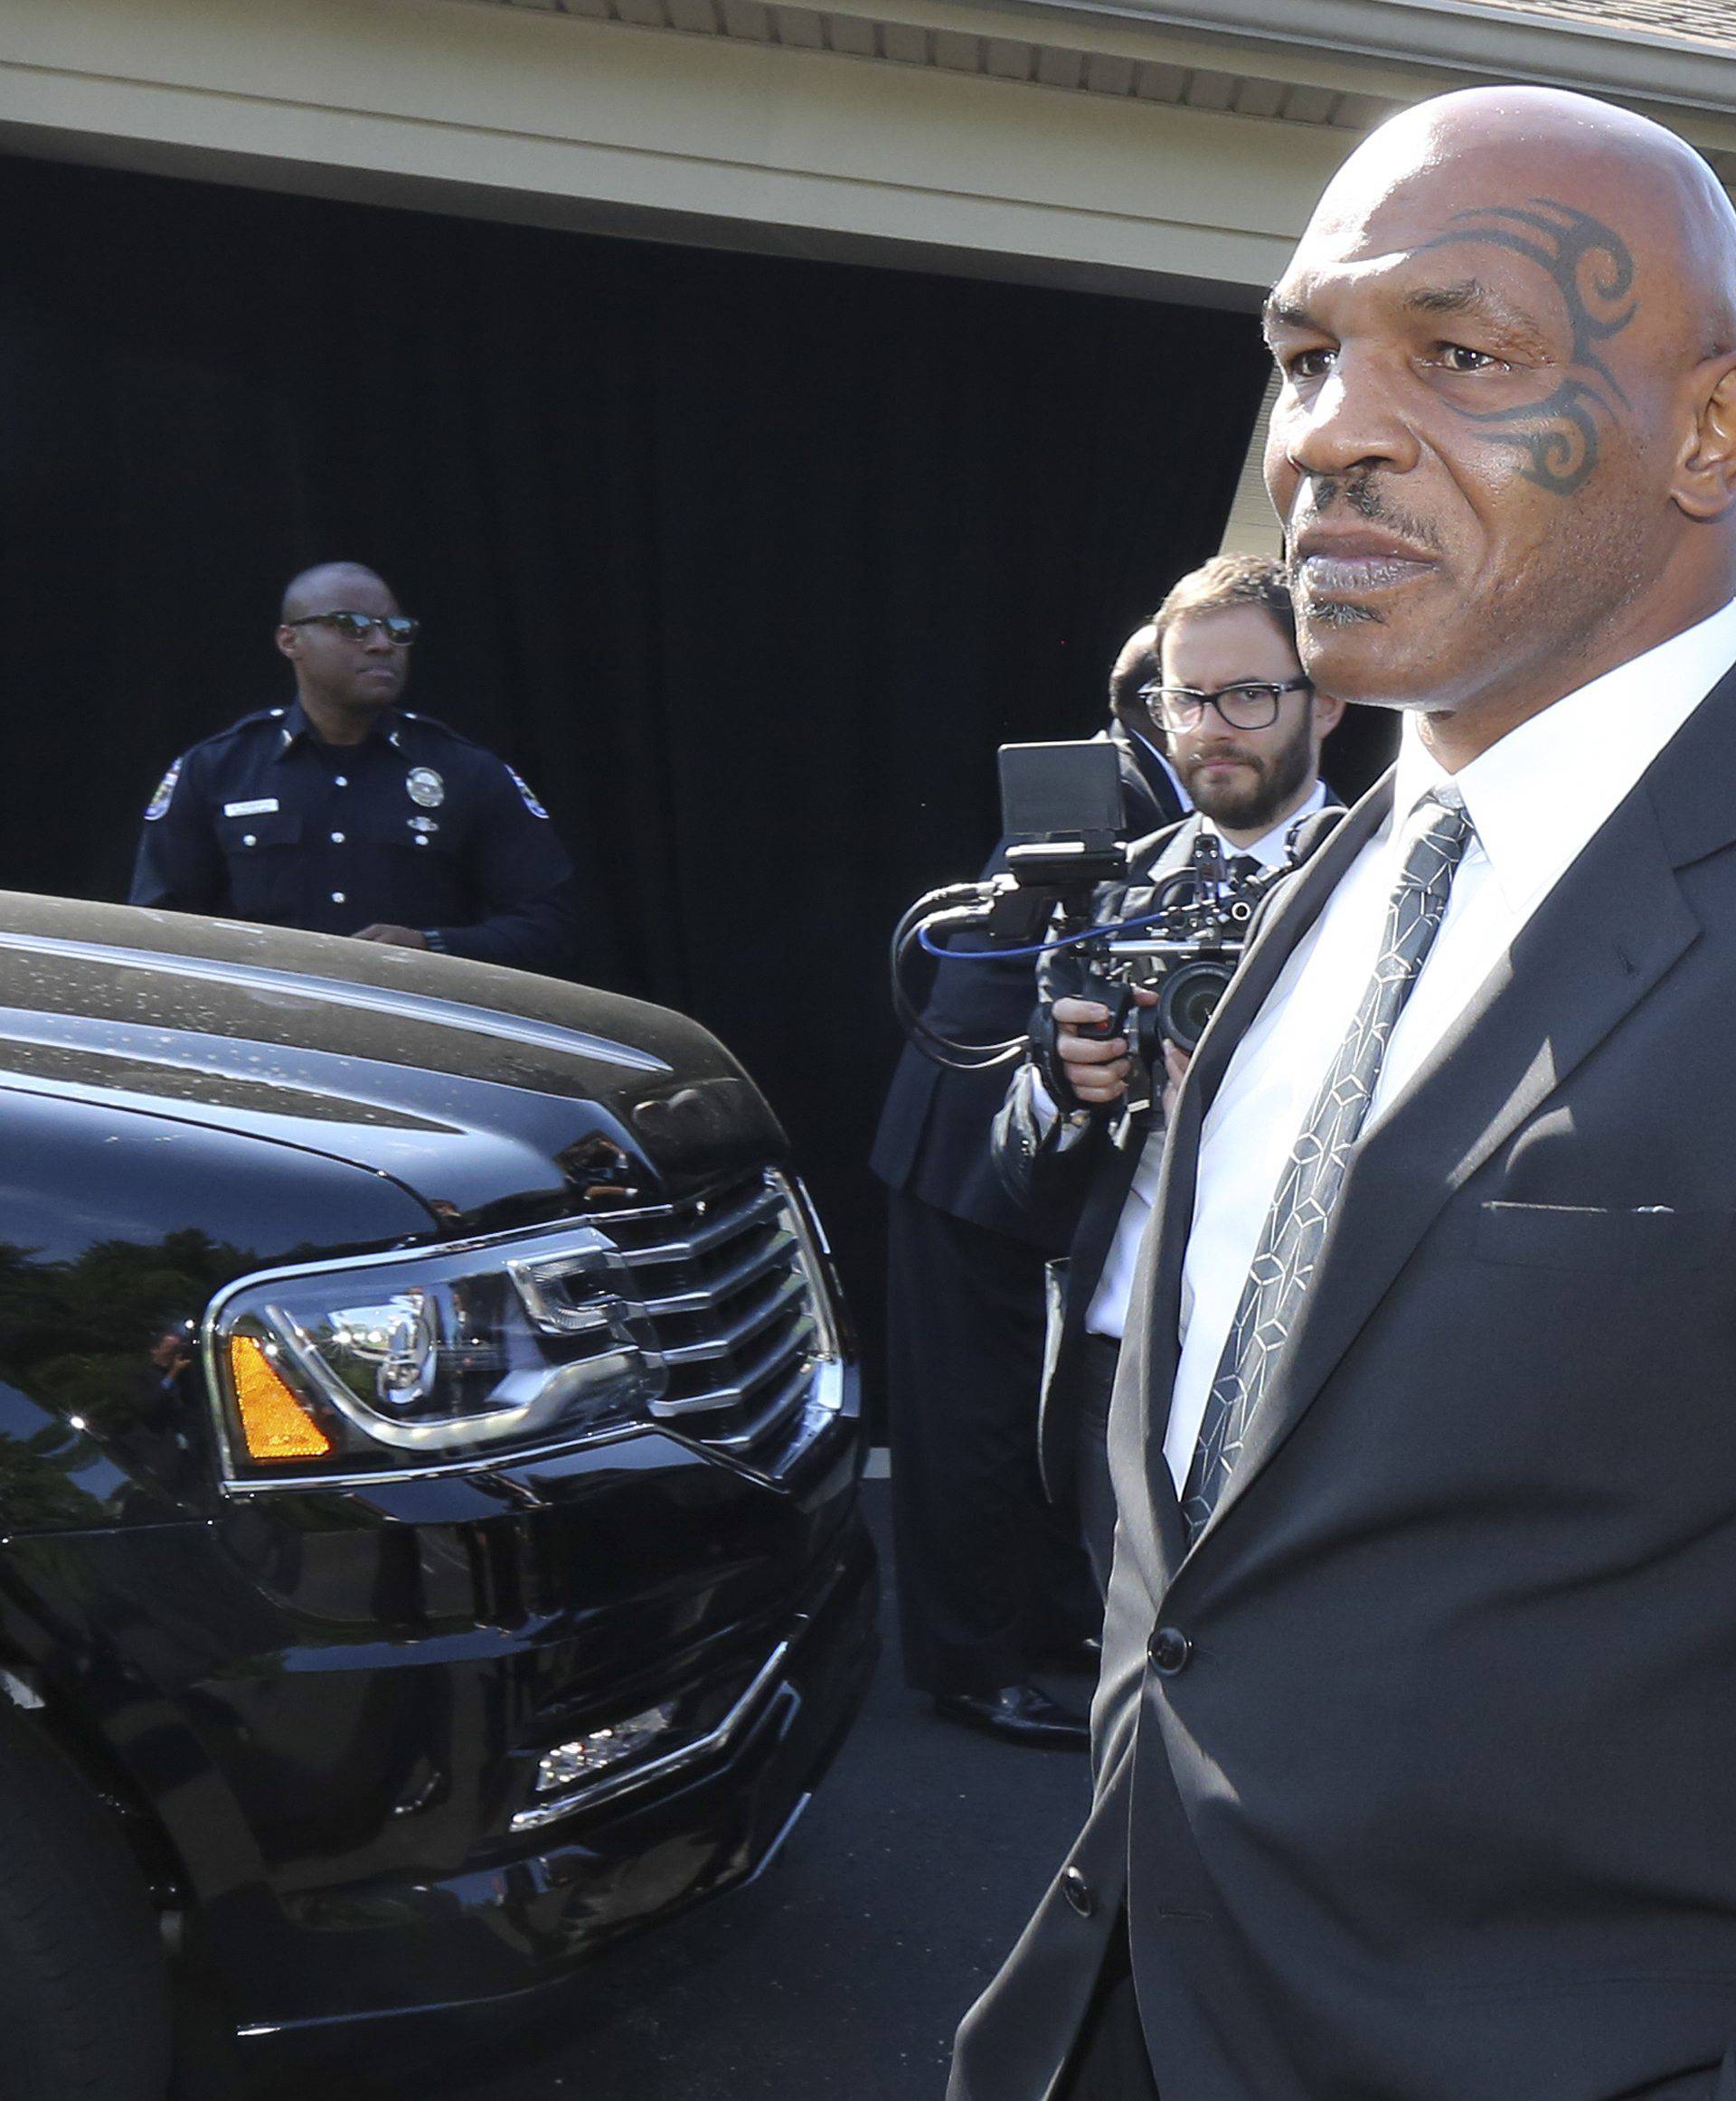 Pallbearer Mike Tyson leaves the funeral home to attend Muhammad Ali's memorial in Louisville